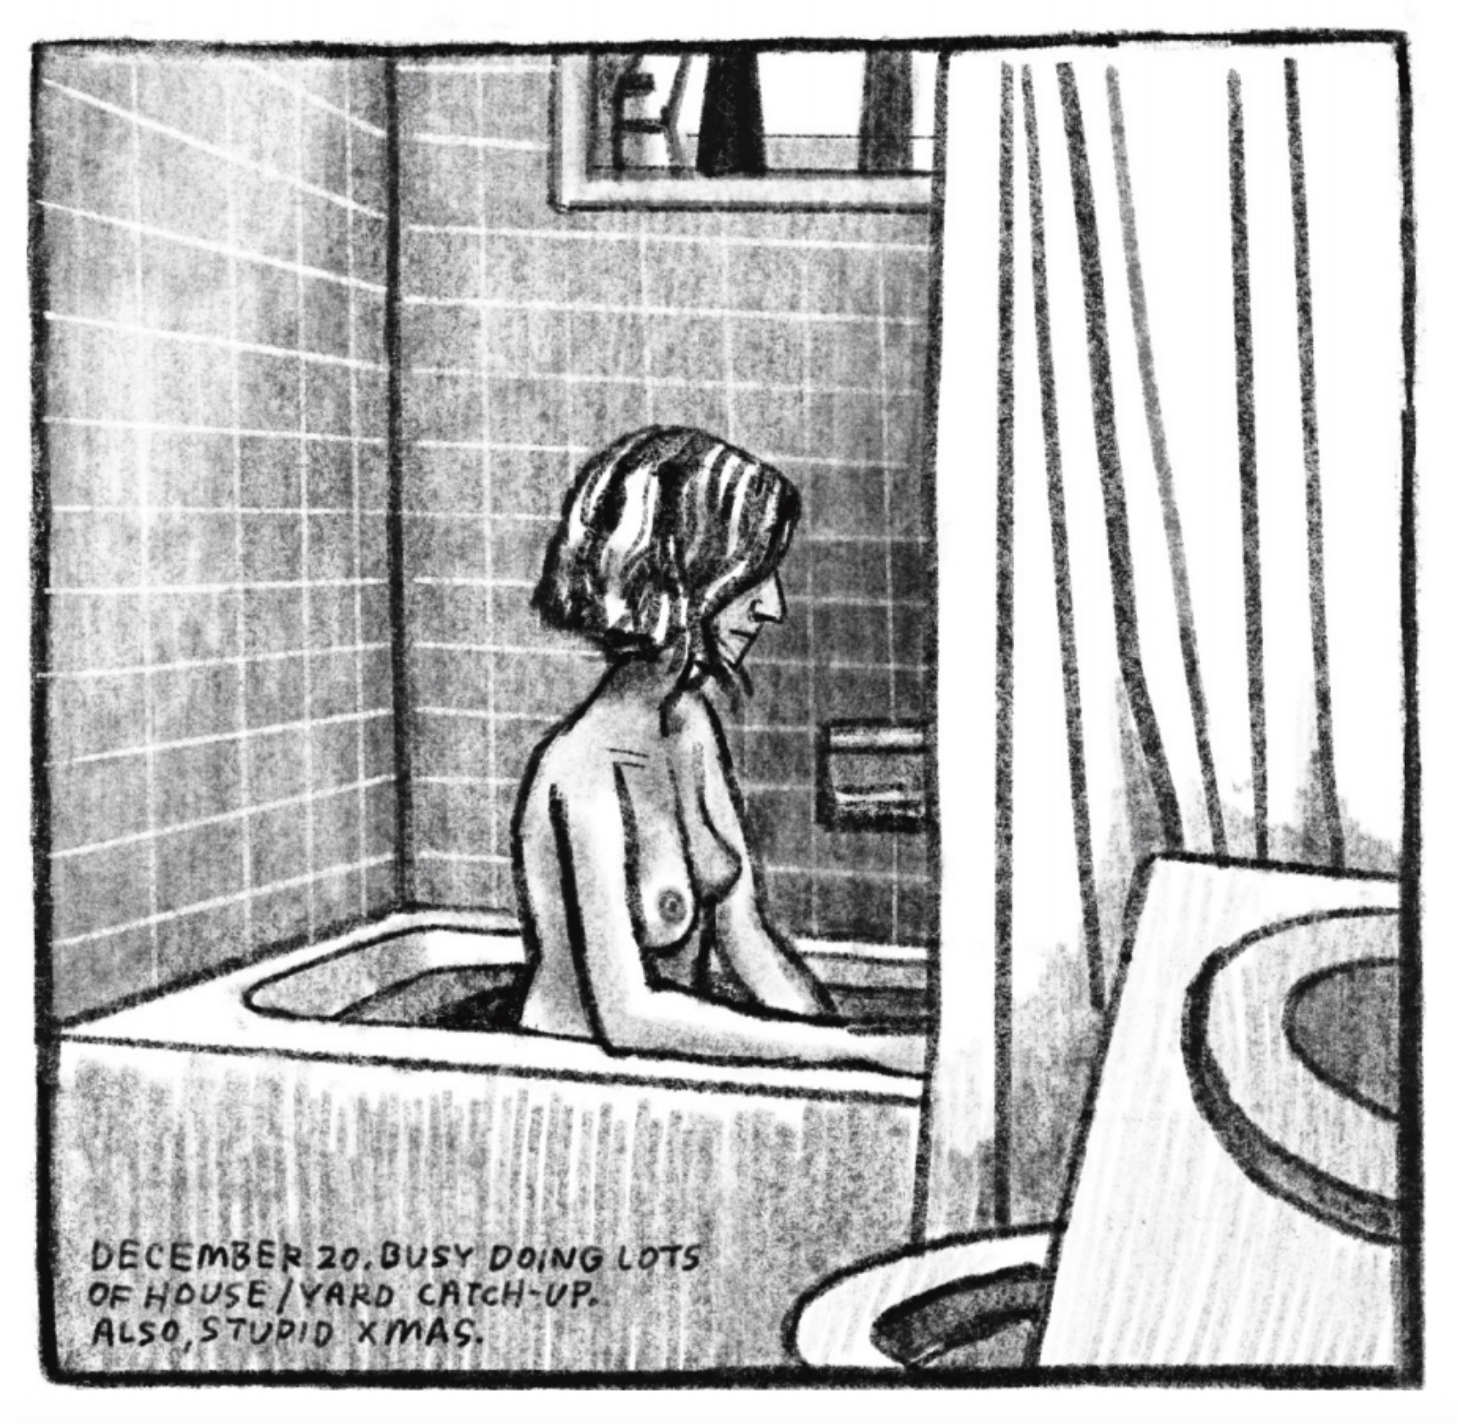 A side view of Kim sitting naked in the bathtub, visible only from the waist up. She looks ahead, face mostly covered by her hair. The shower curtains are drawn half-way. â€œDecember 20. Busy doing lots of house/yard catch-up. Also, stupid Xmas.â€